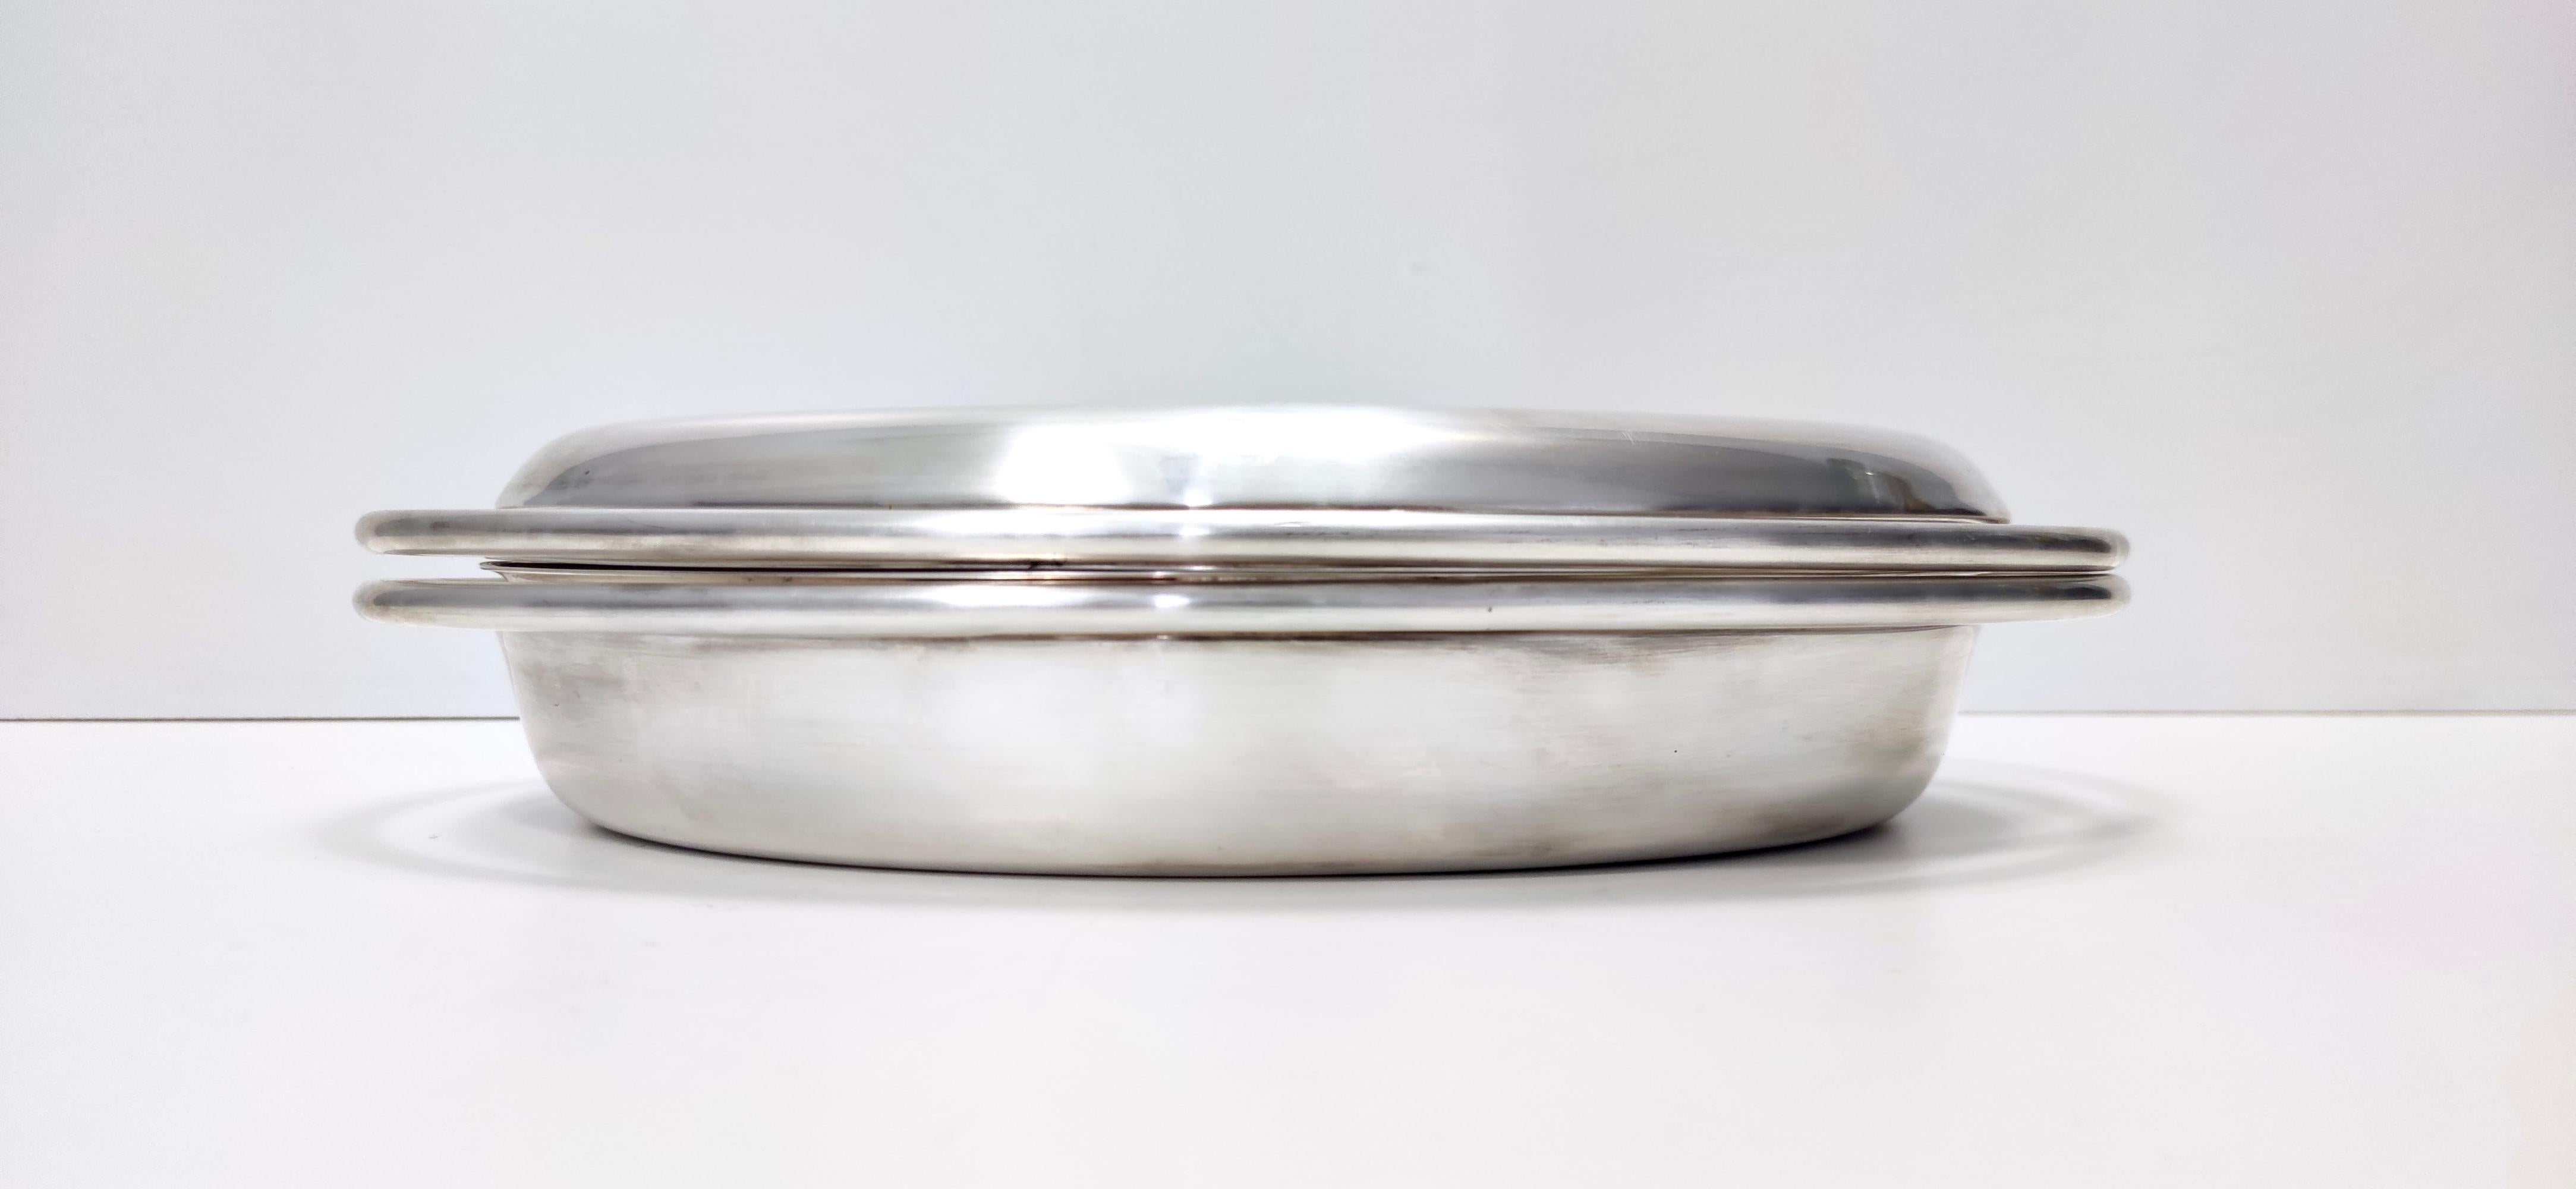 Postmodern Lino Sabattini Silver-Plated Metal Serving Plate, Marked, Italy In Excellent Condition For Sale In Bresso, Lombardy